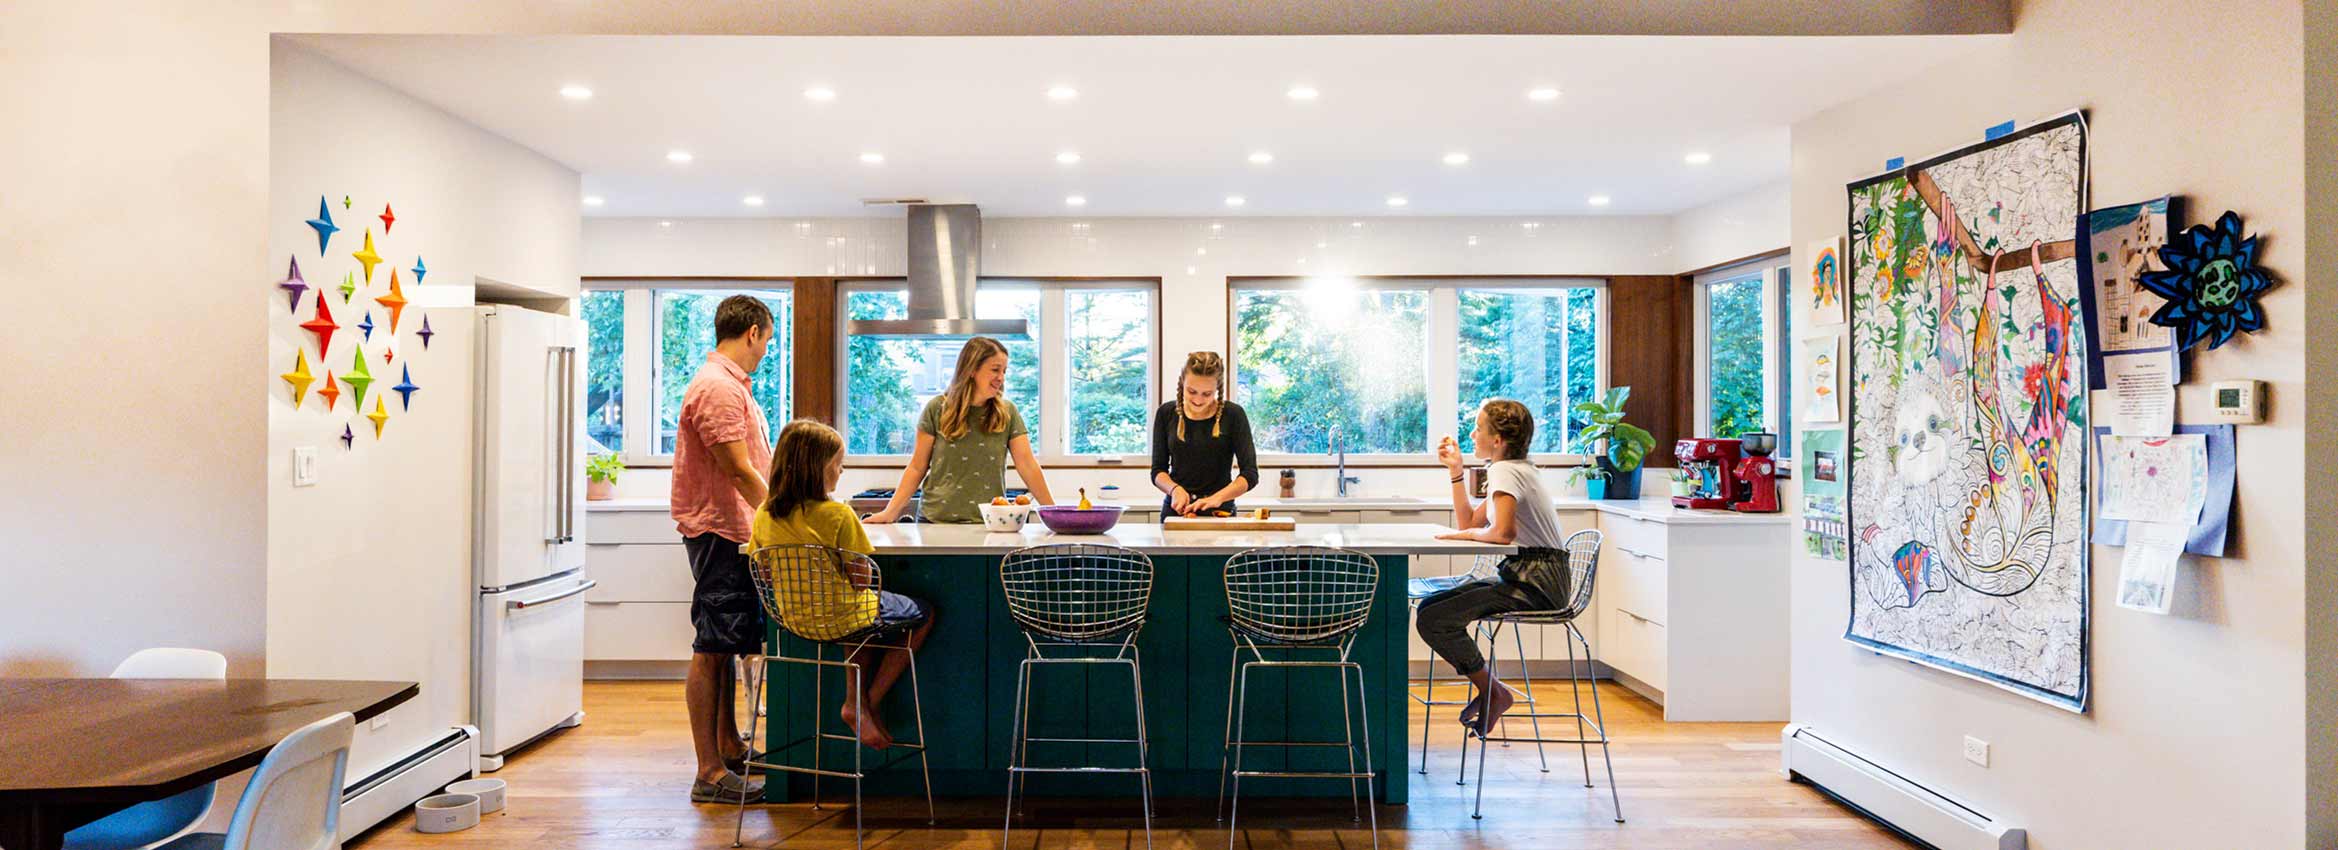 family gathered in modern kitchen addition